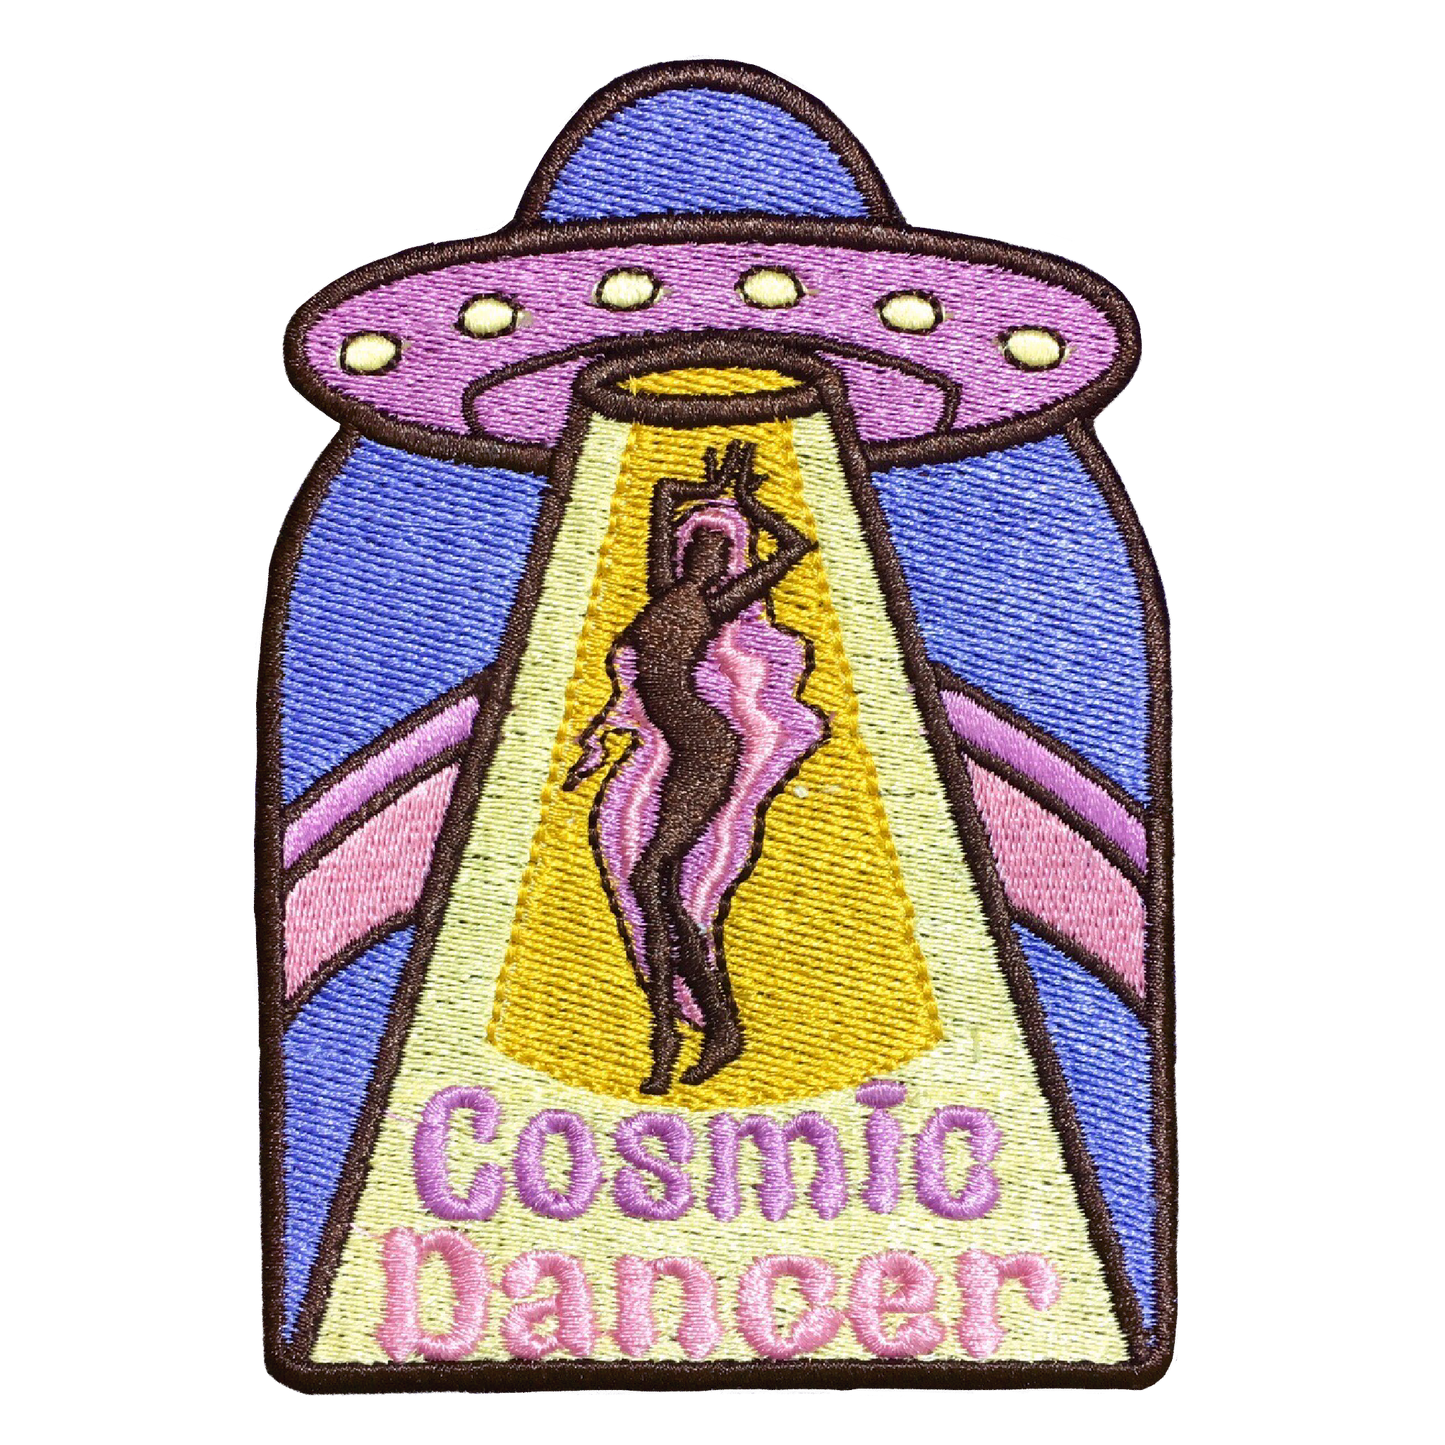 The Cosmic Dancer Patch